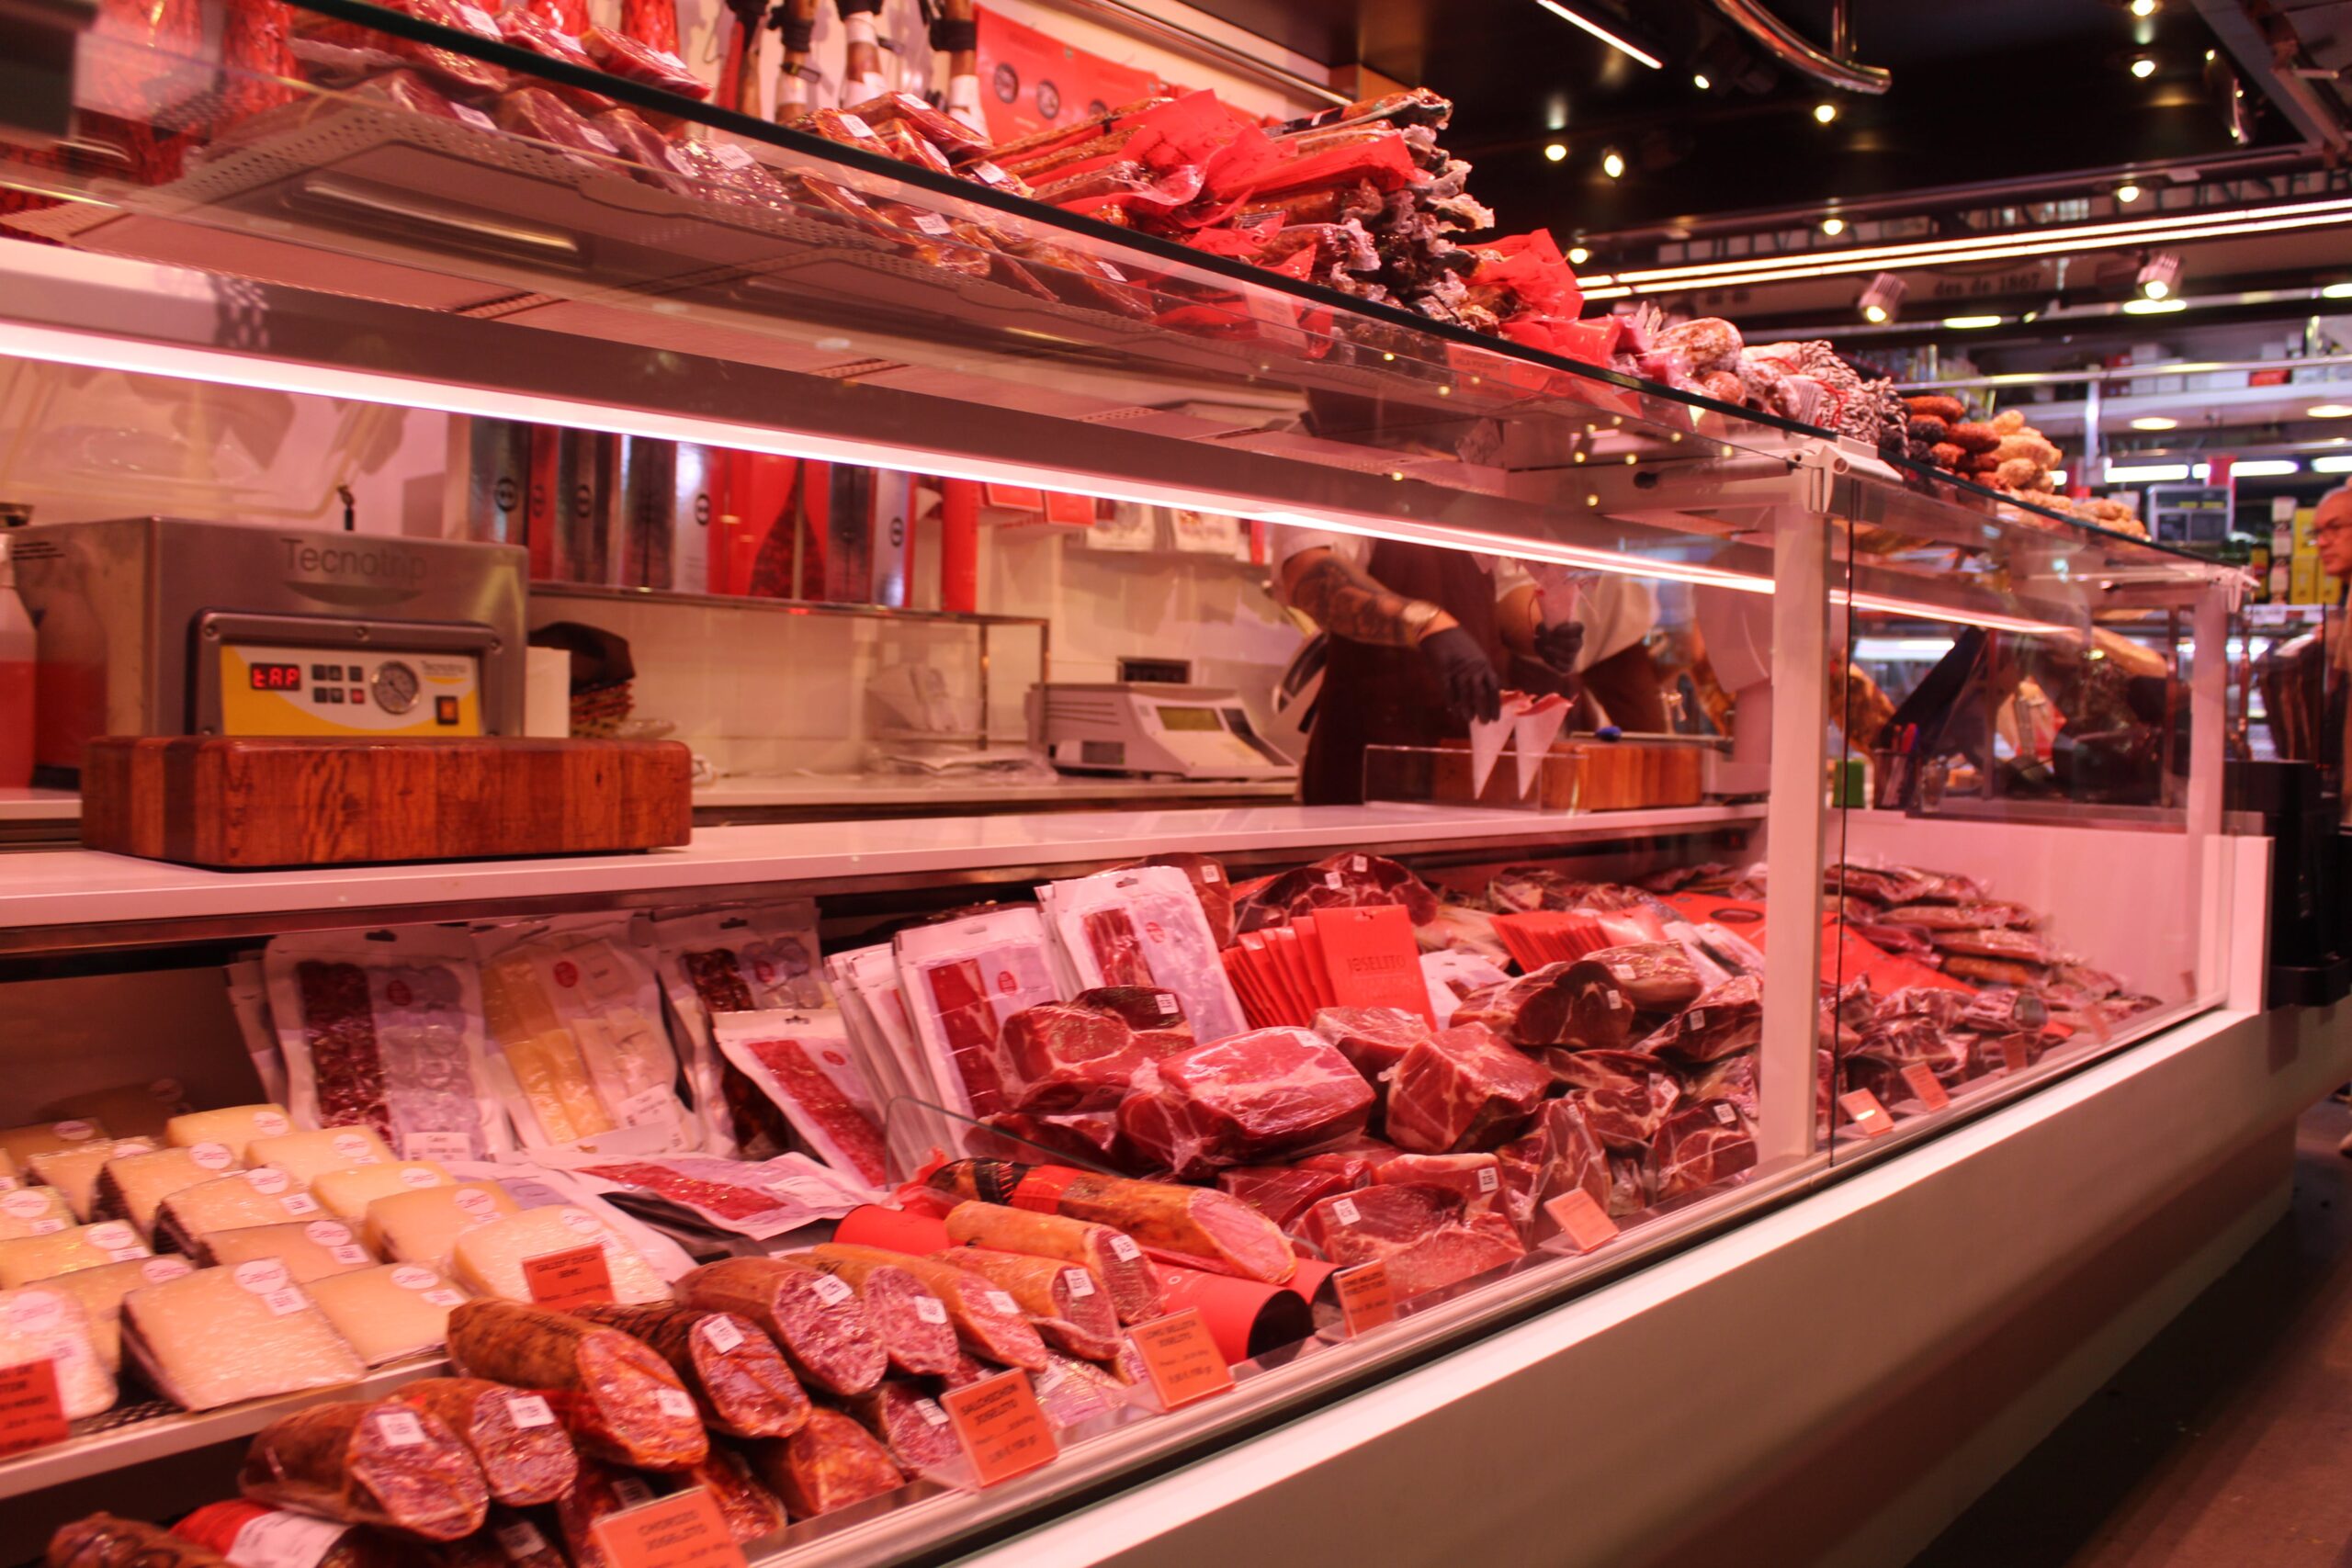 meat counter in a grocery store showing raw beef and pork cuts